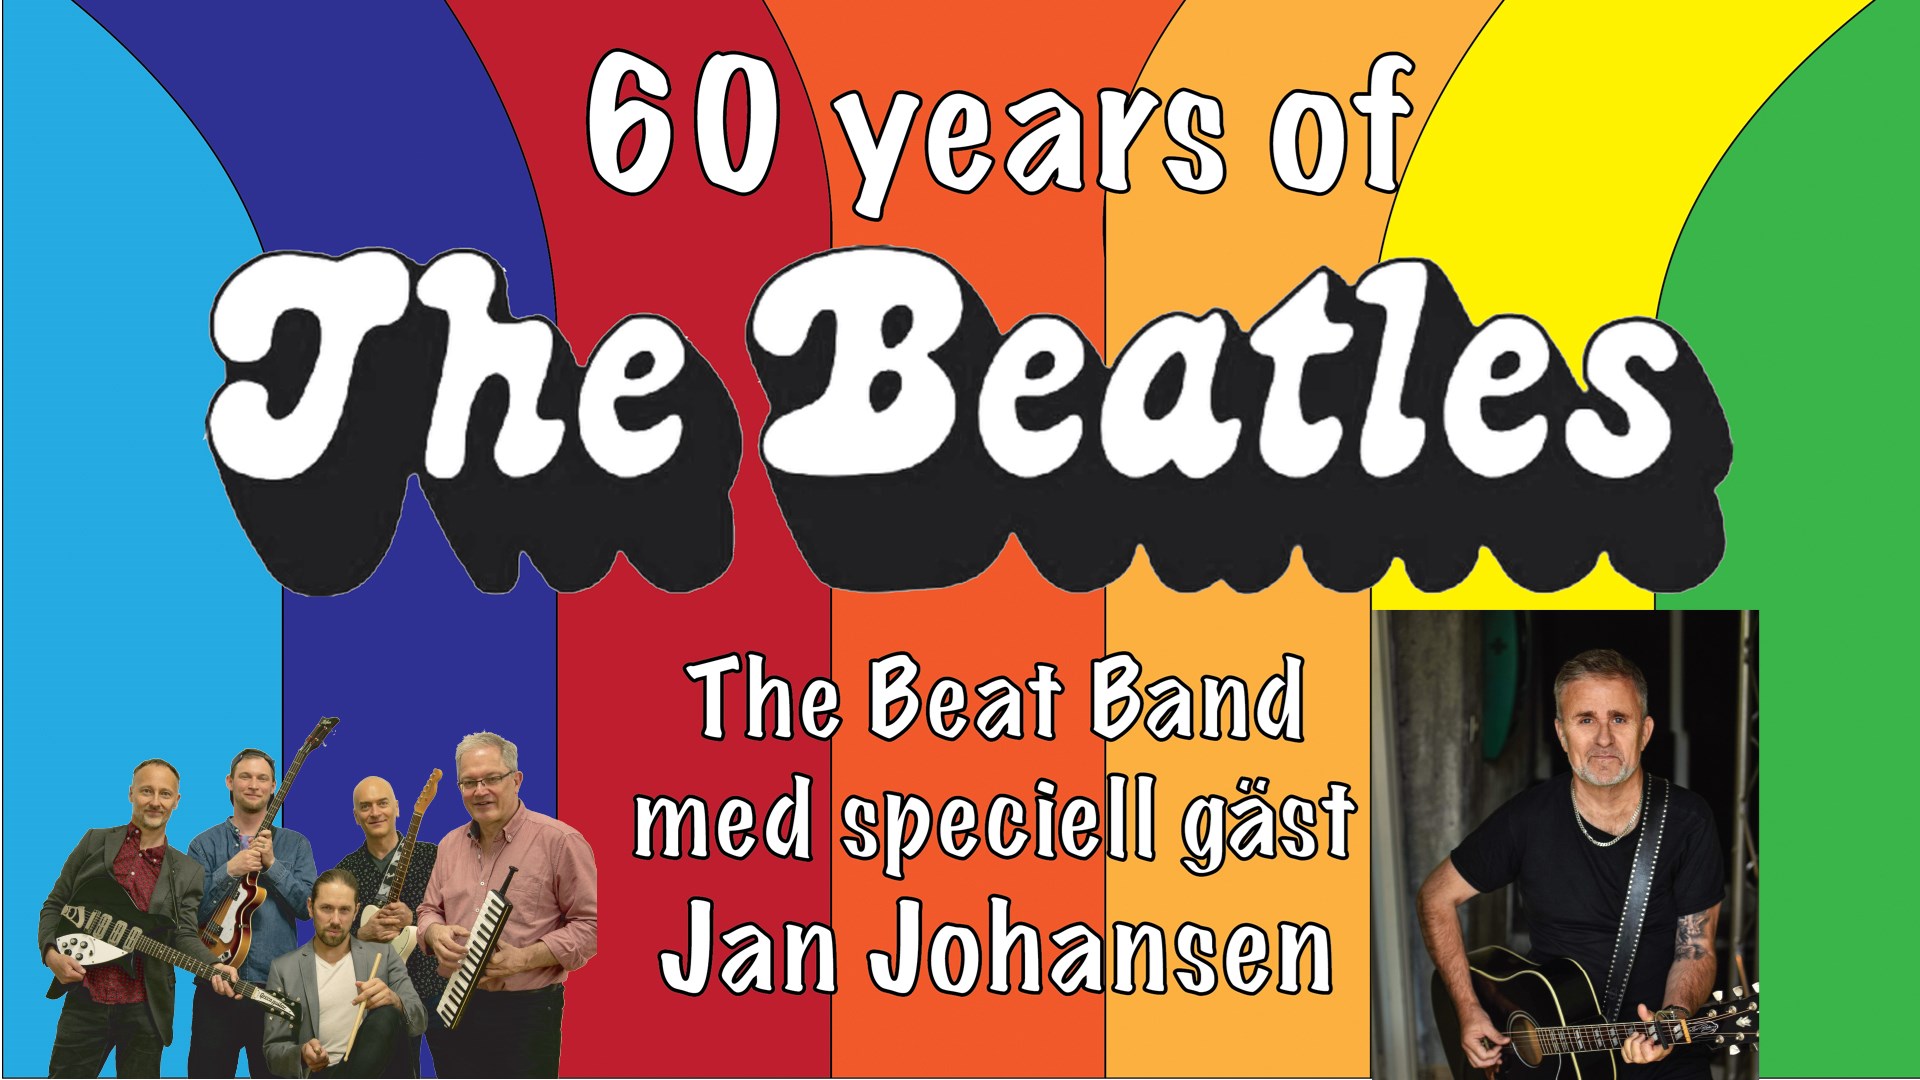 60 years of The Beatles - The Beat Band